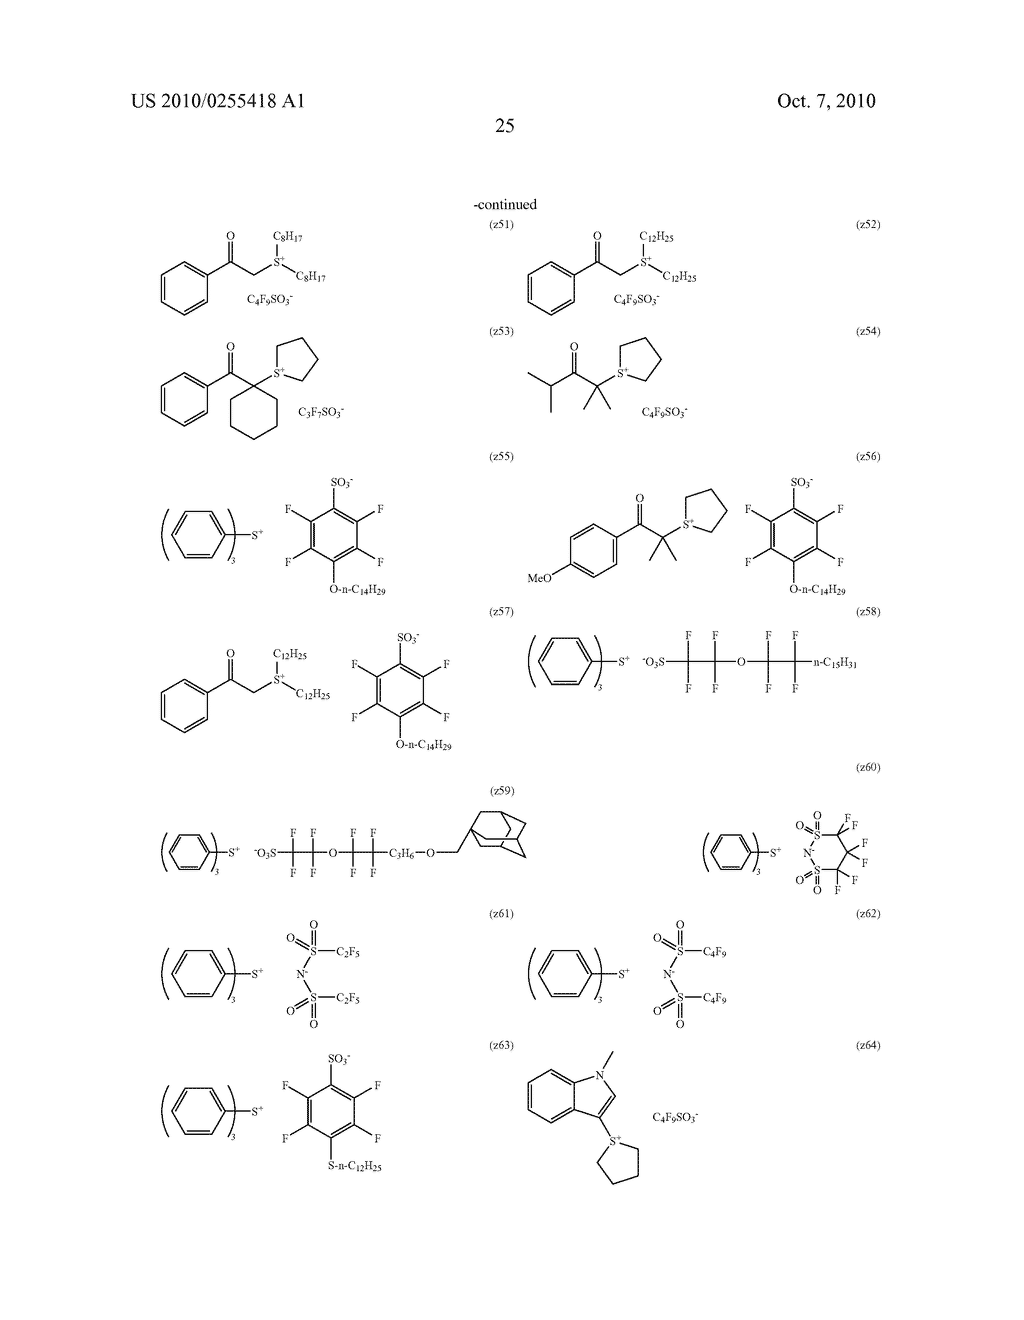 ACTINIC-RAY- OR RADIATION-SENSITIVE RESIN COMPOSITION AND METHOD OF FORMING PATTERN THEREWITH - diagram, schematic, and image 29